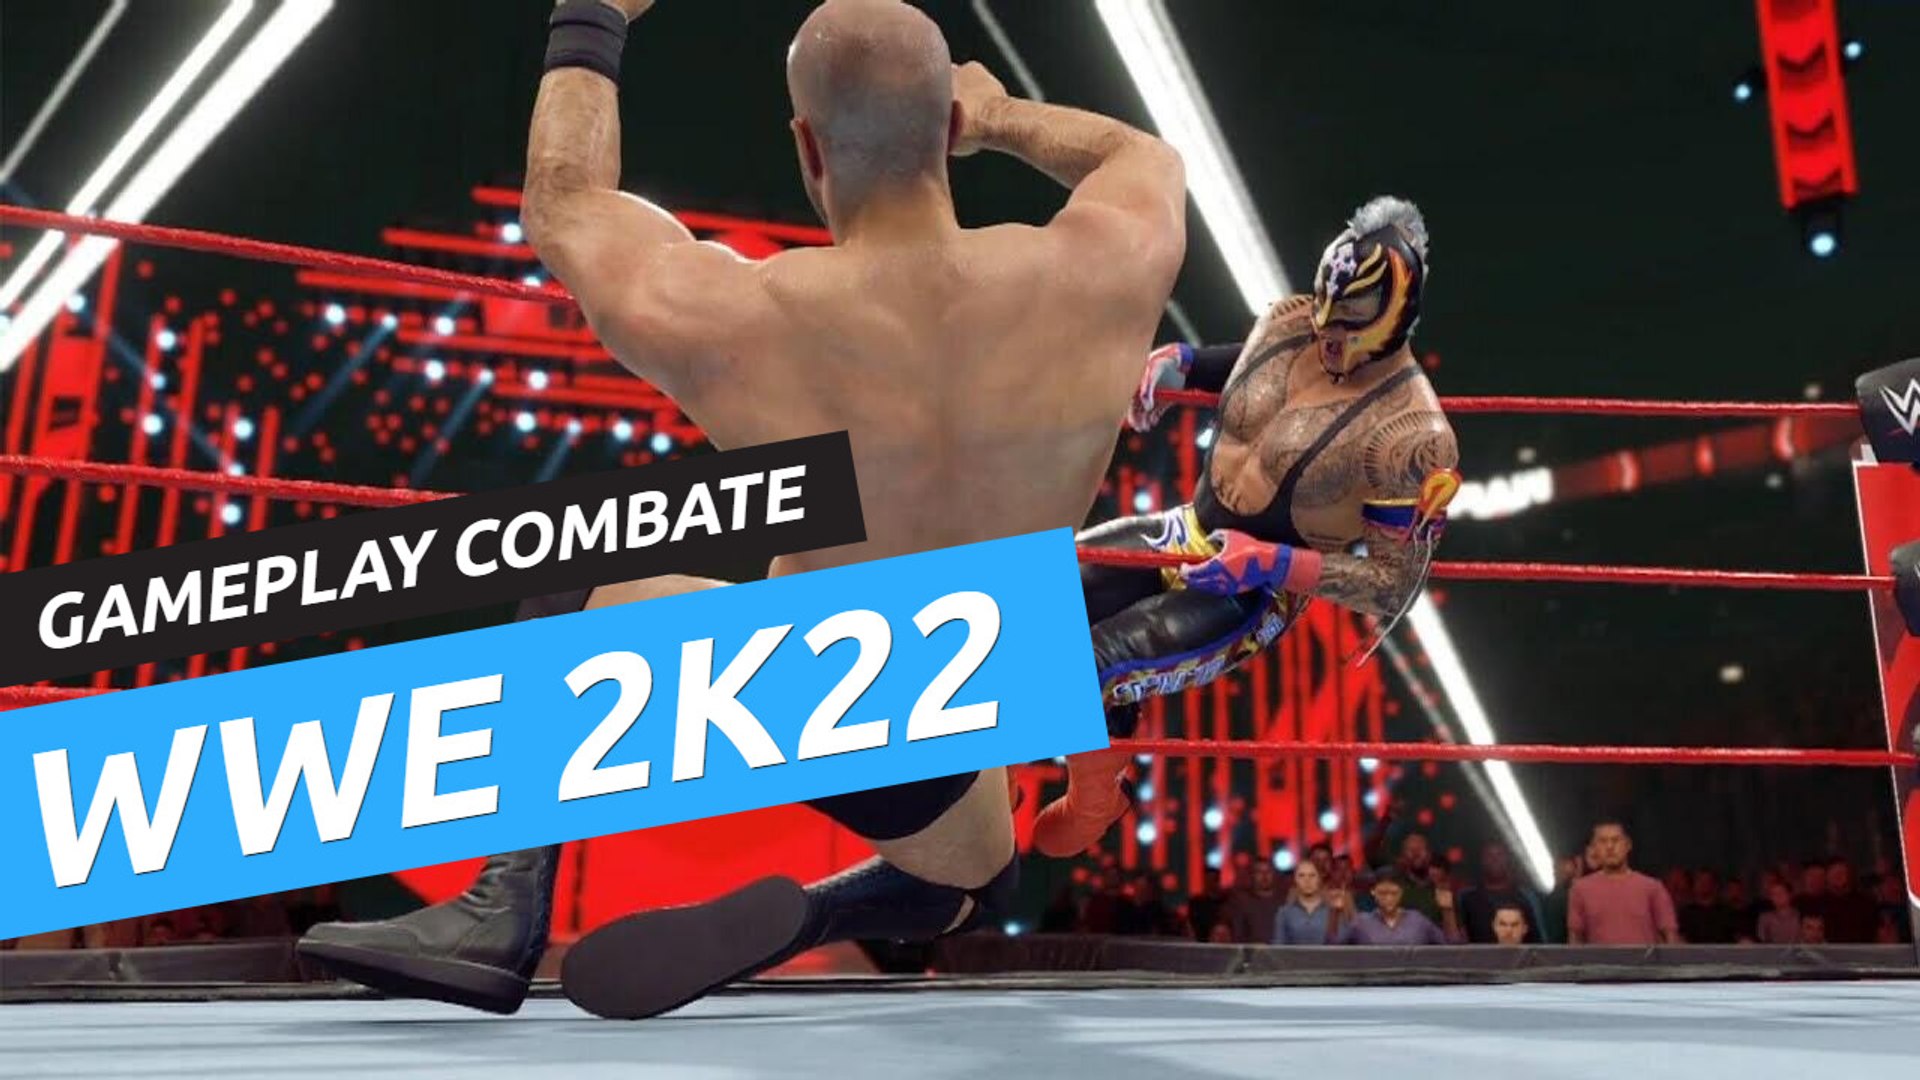 WWE 2K22 Gameplay del combate - Vídeo Dailymotion